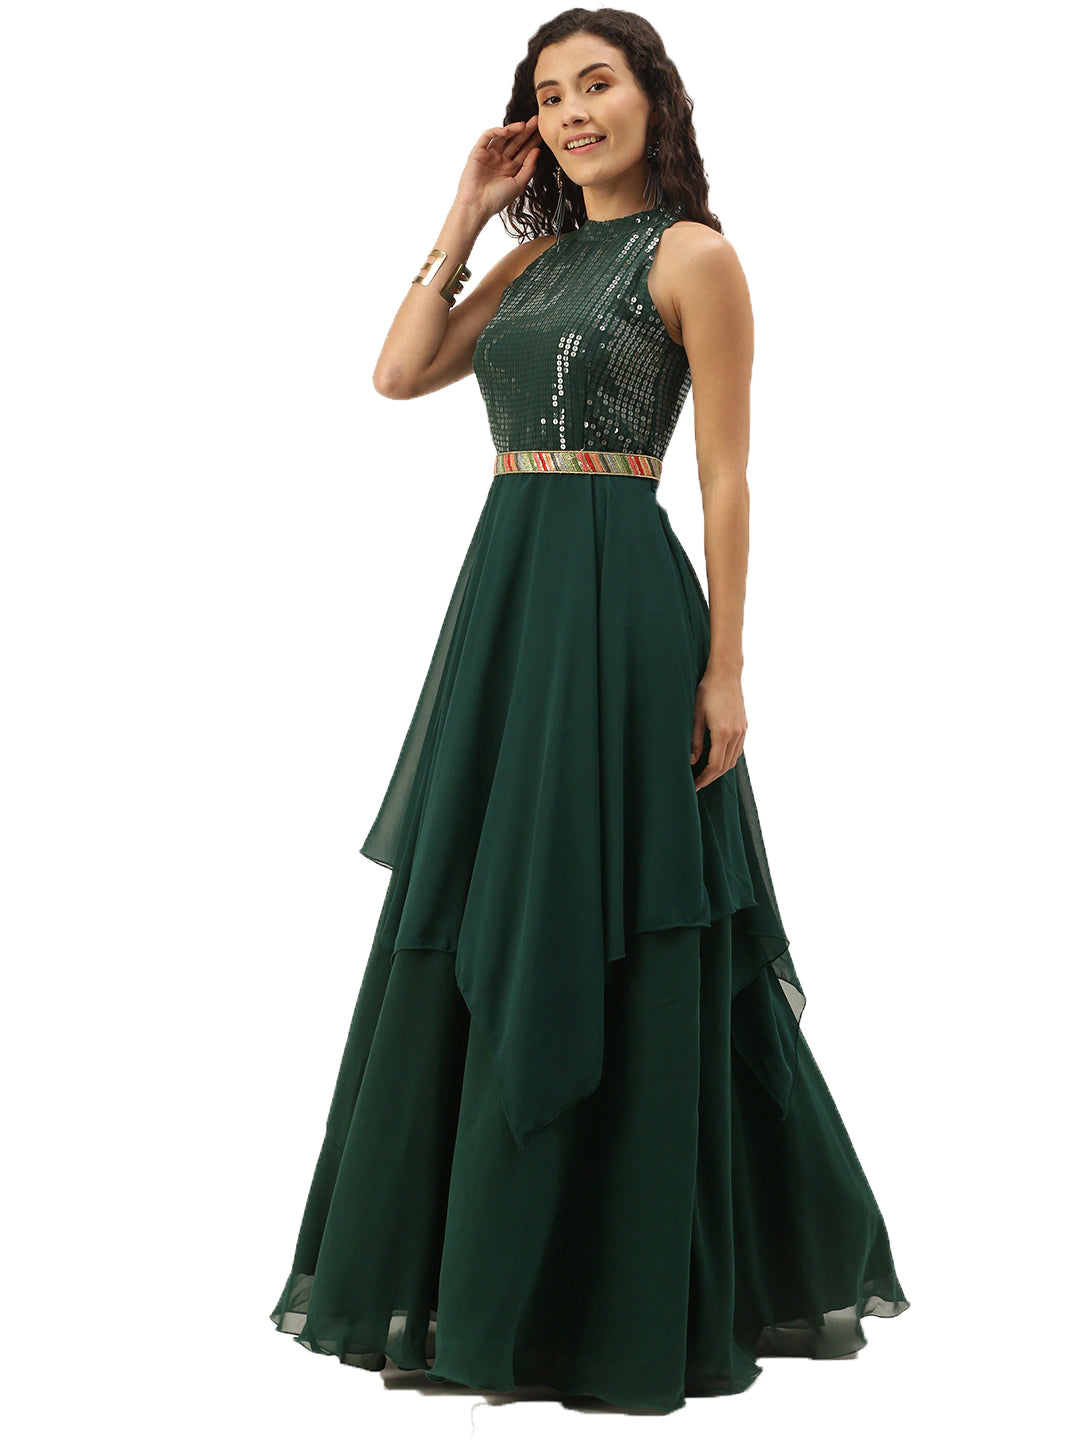 Green-Embroidered-Handkerchief-Gown